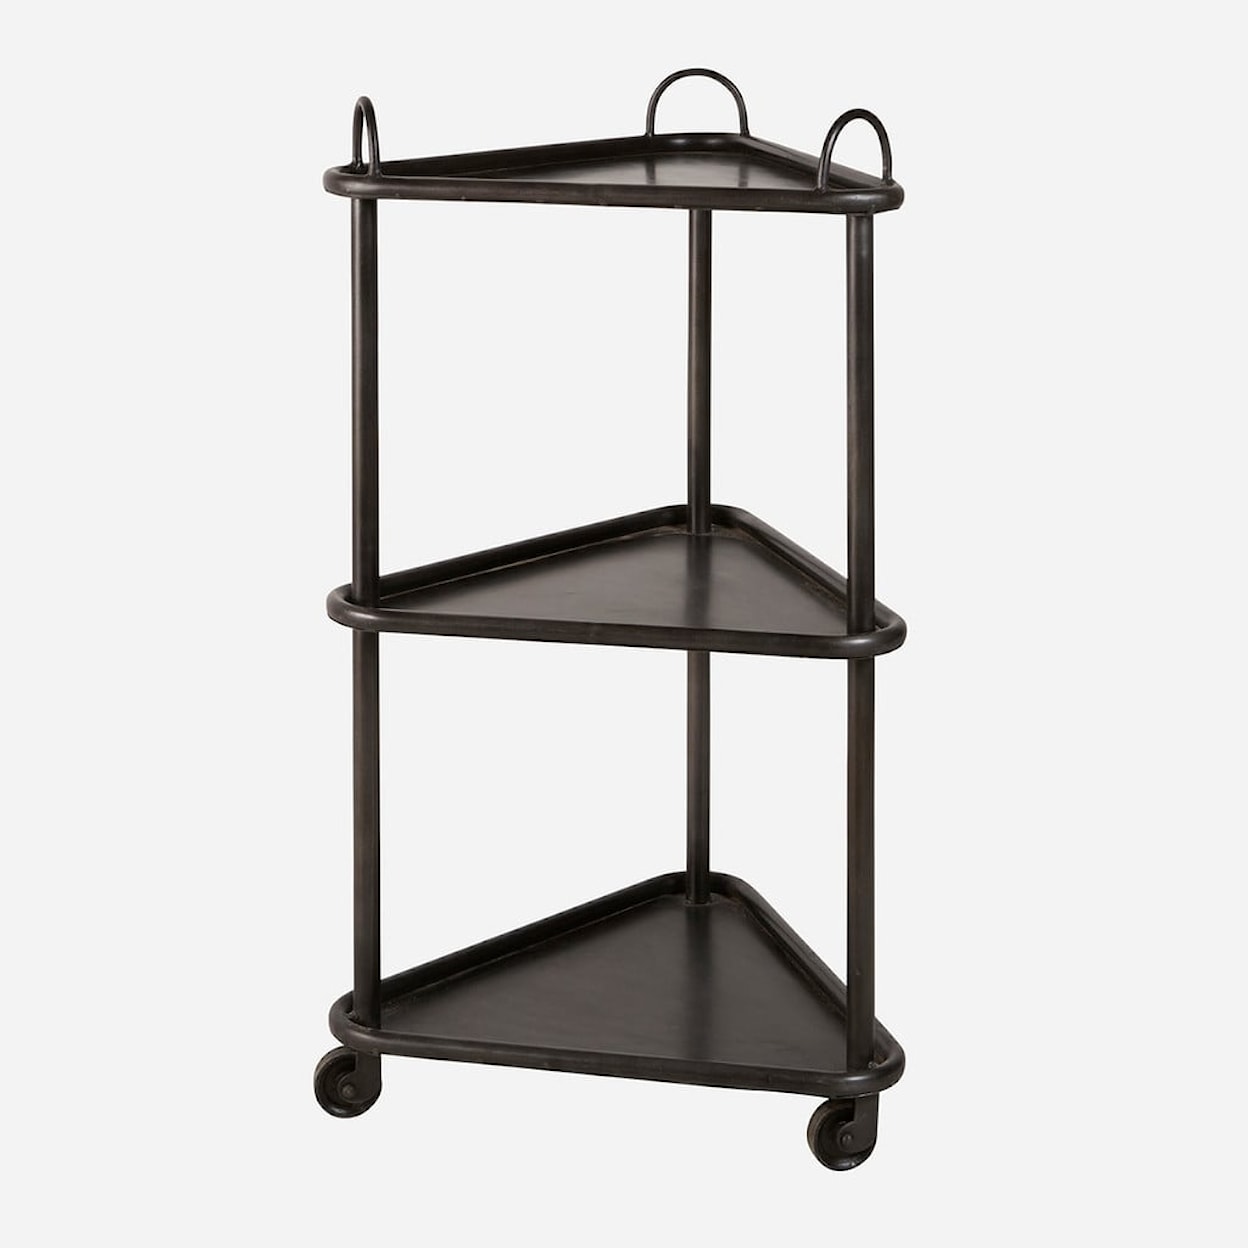 BOBO Intriguing Objects BOBO Intriguing Objects French Industrial Three Tier Rolling Cart